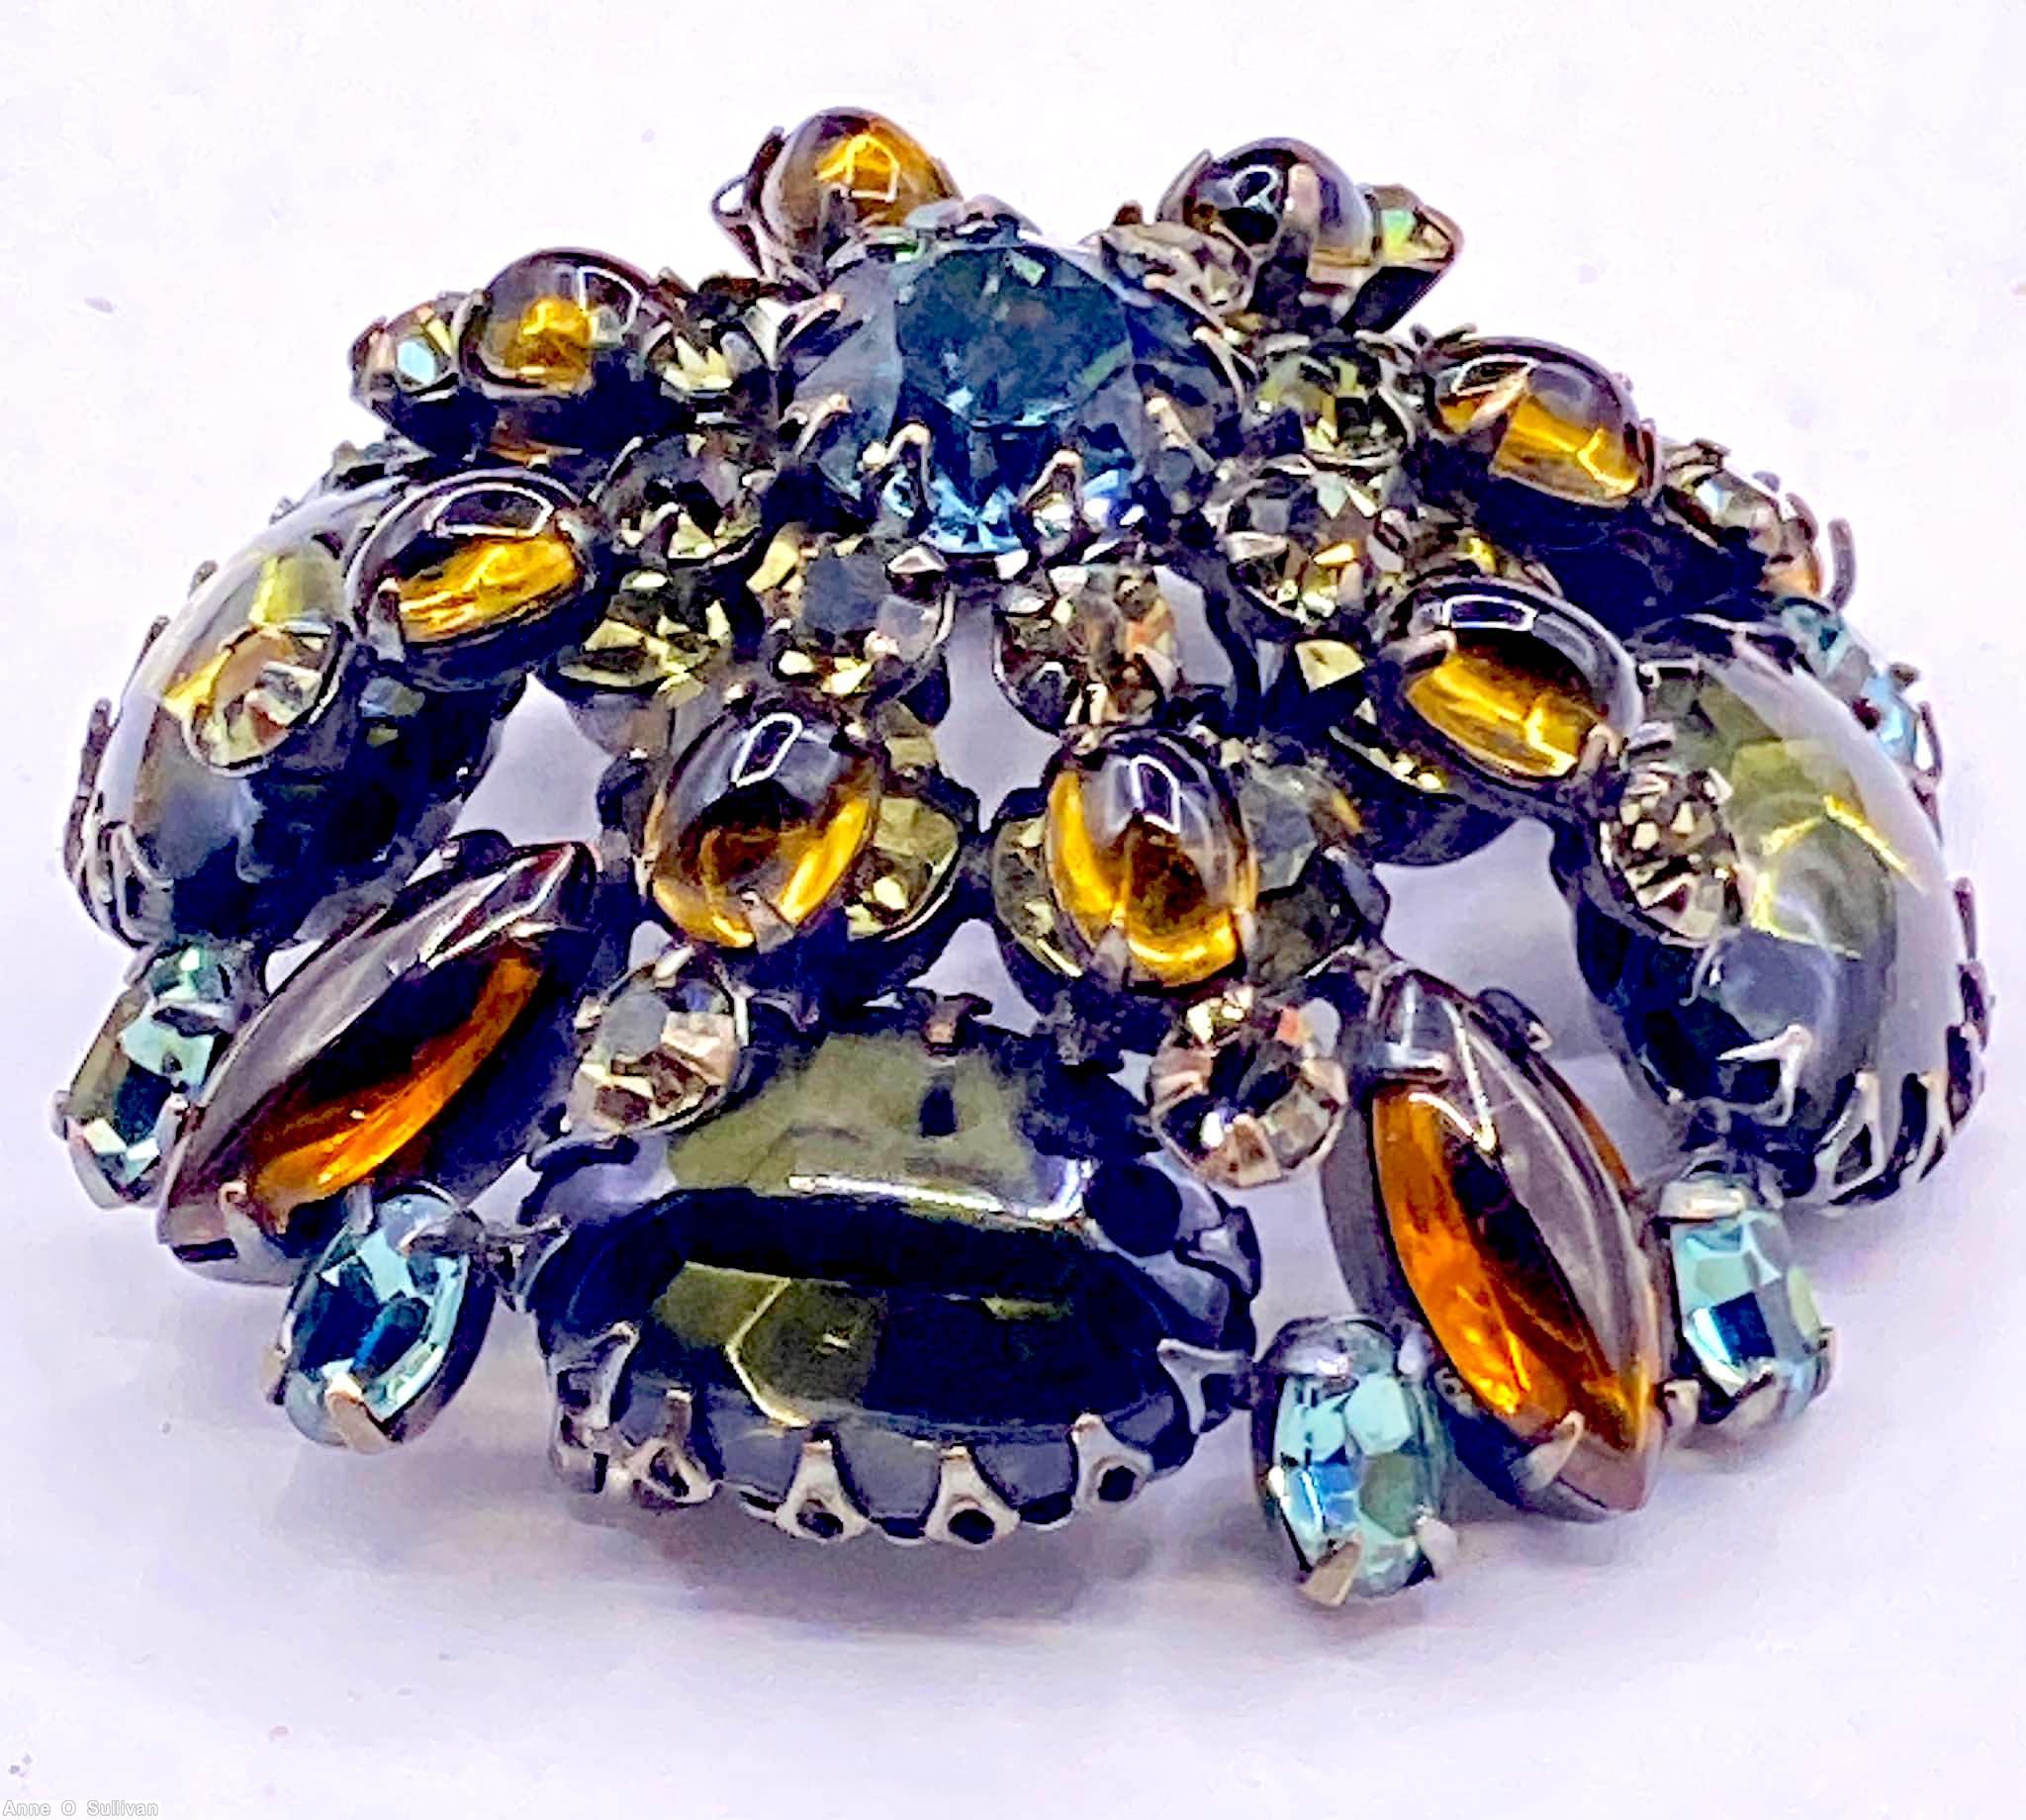 Schreiner domed 4 large oval radial pin 3 rounds 6 surrounding small chaton center chaton 6 small oval stone 4 large navette clear blue center chaton topaz large navette dark olivine large oval cabochon amber small oval cabochon jewelry